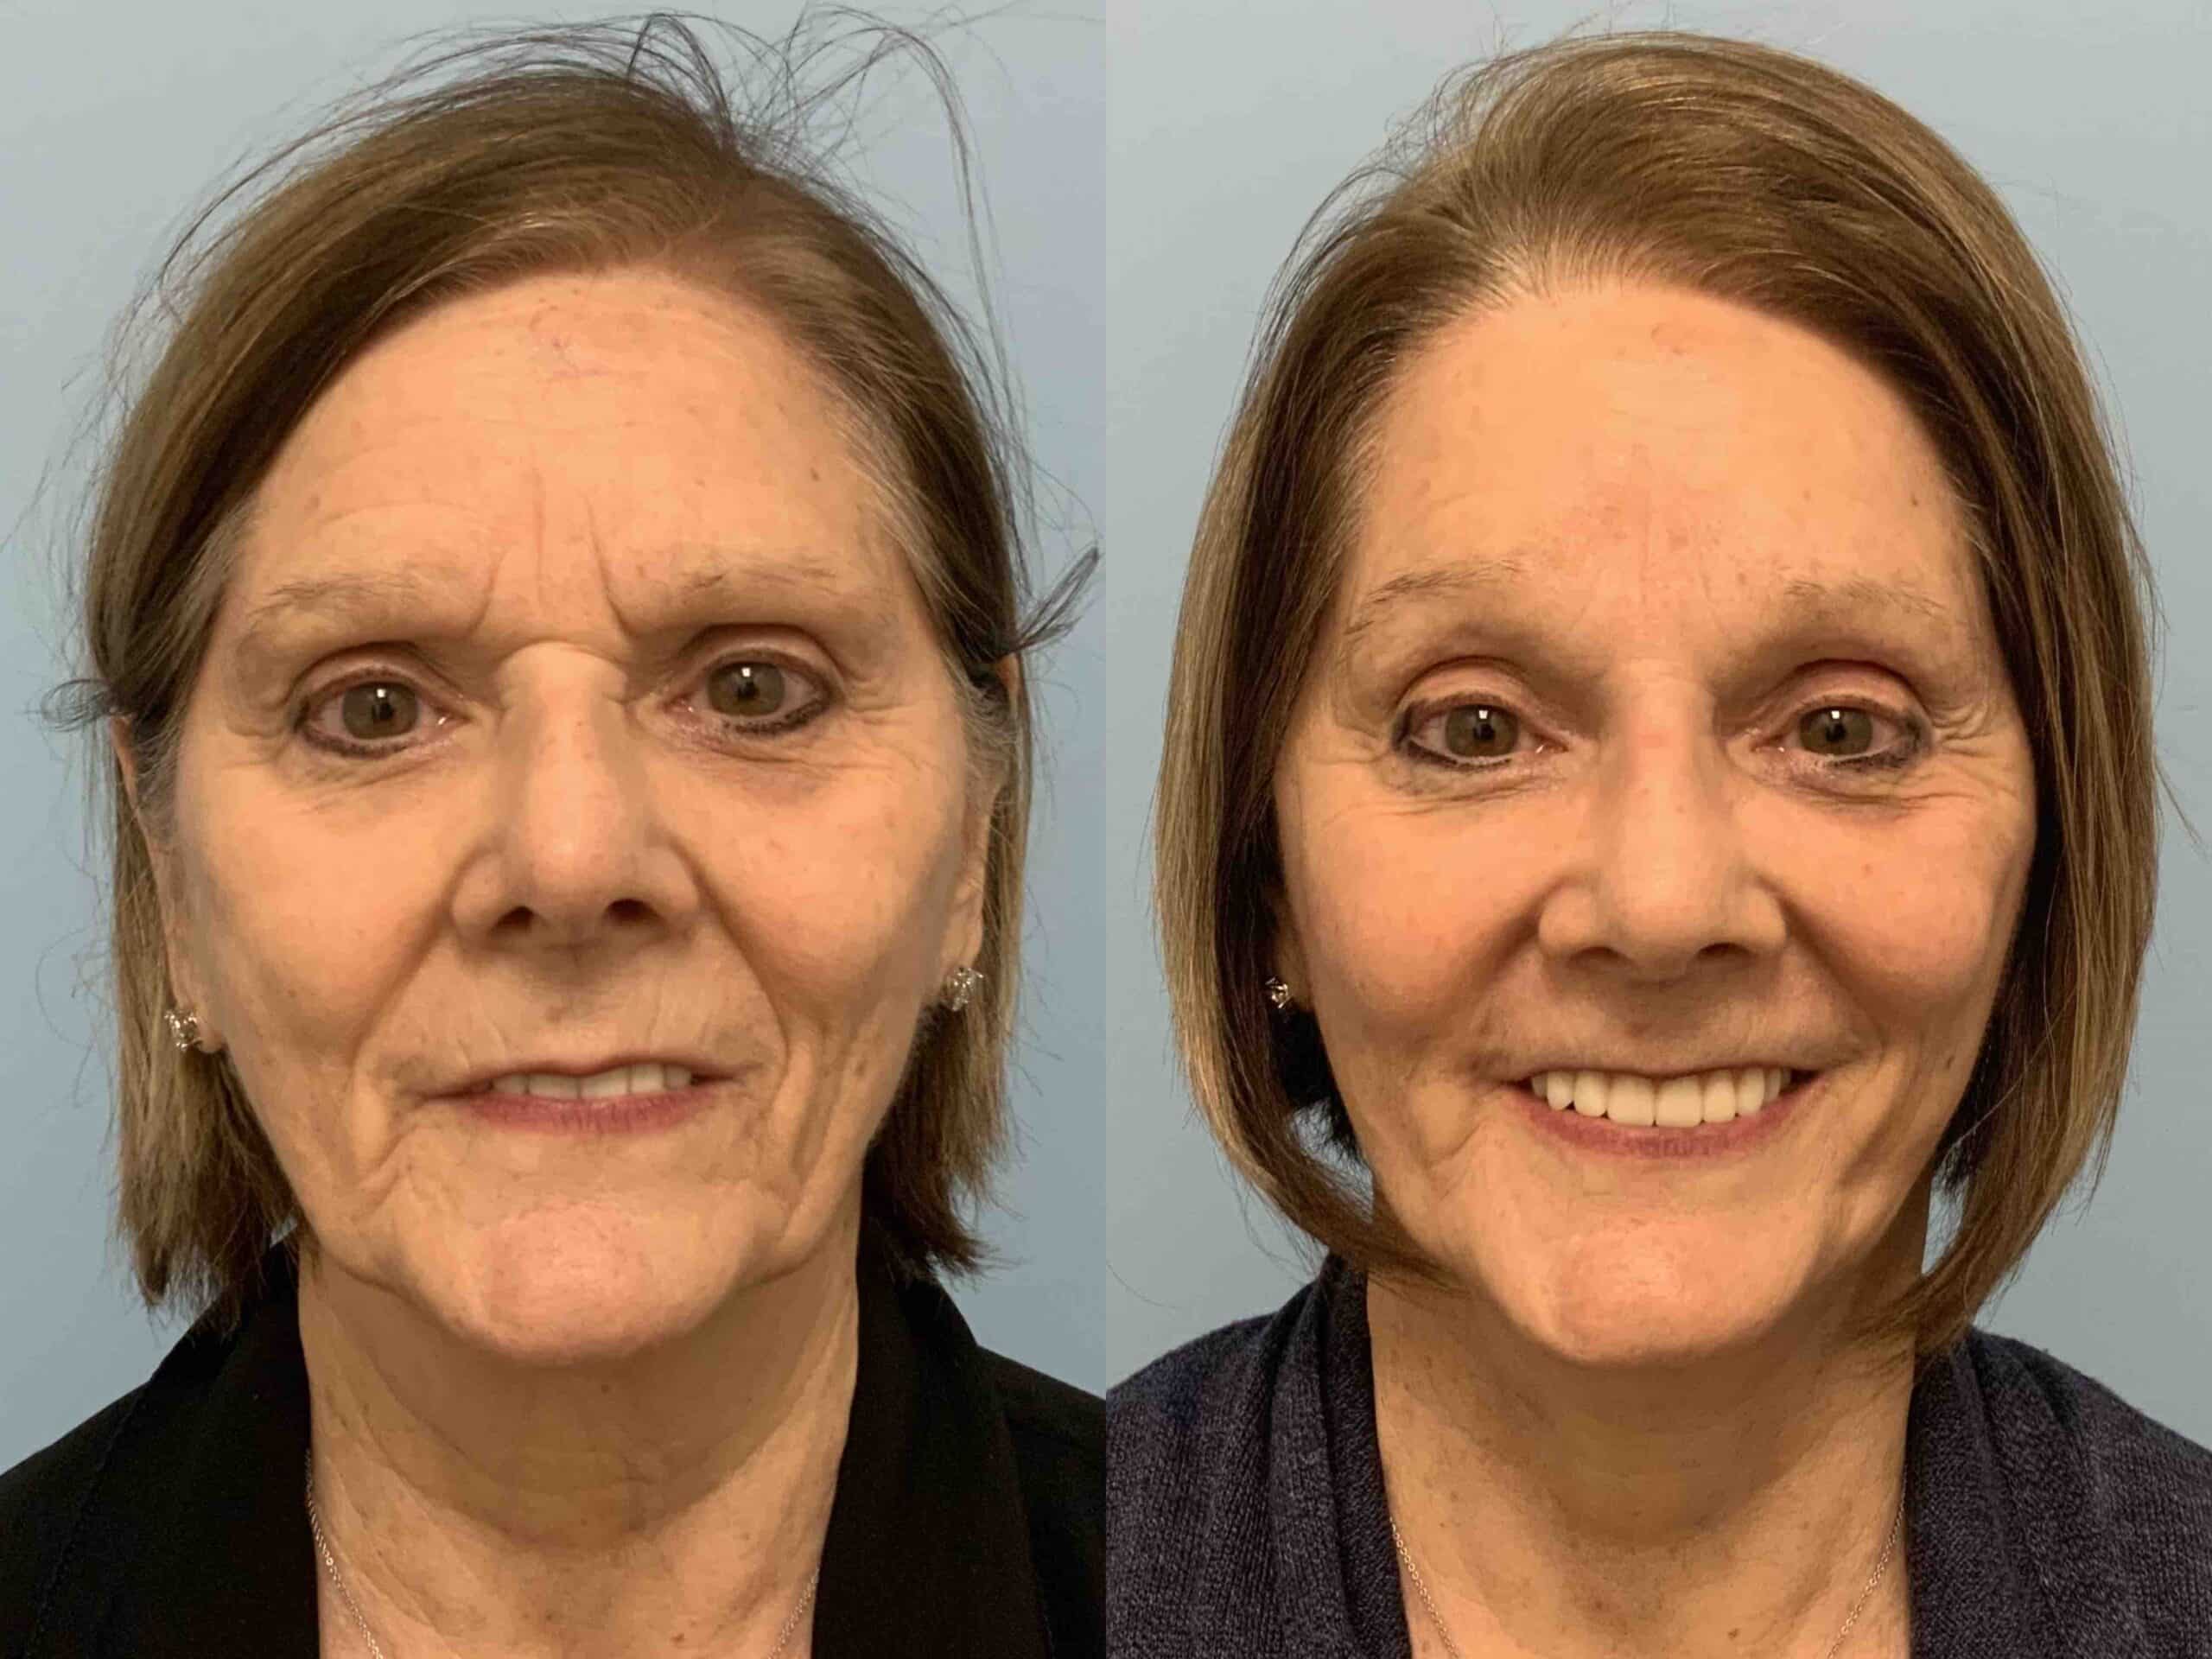 Before and after, patient 8 mo post op from Facelift, Neck Lift, Autologous Fat Transfer to Face procedures performed by Dr. Paul Vanek